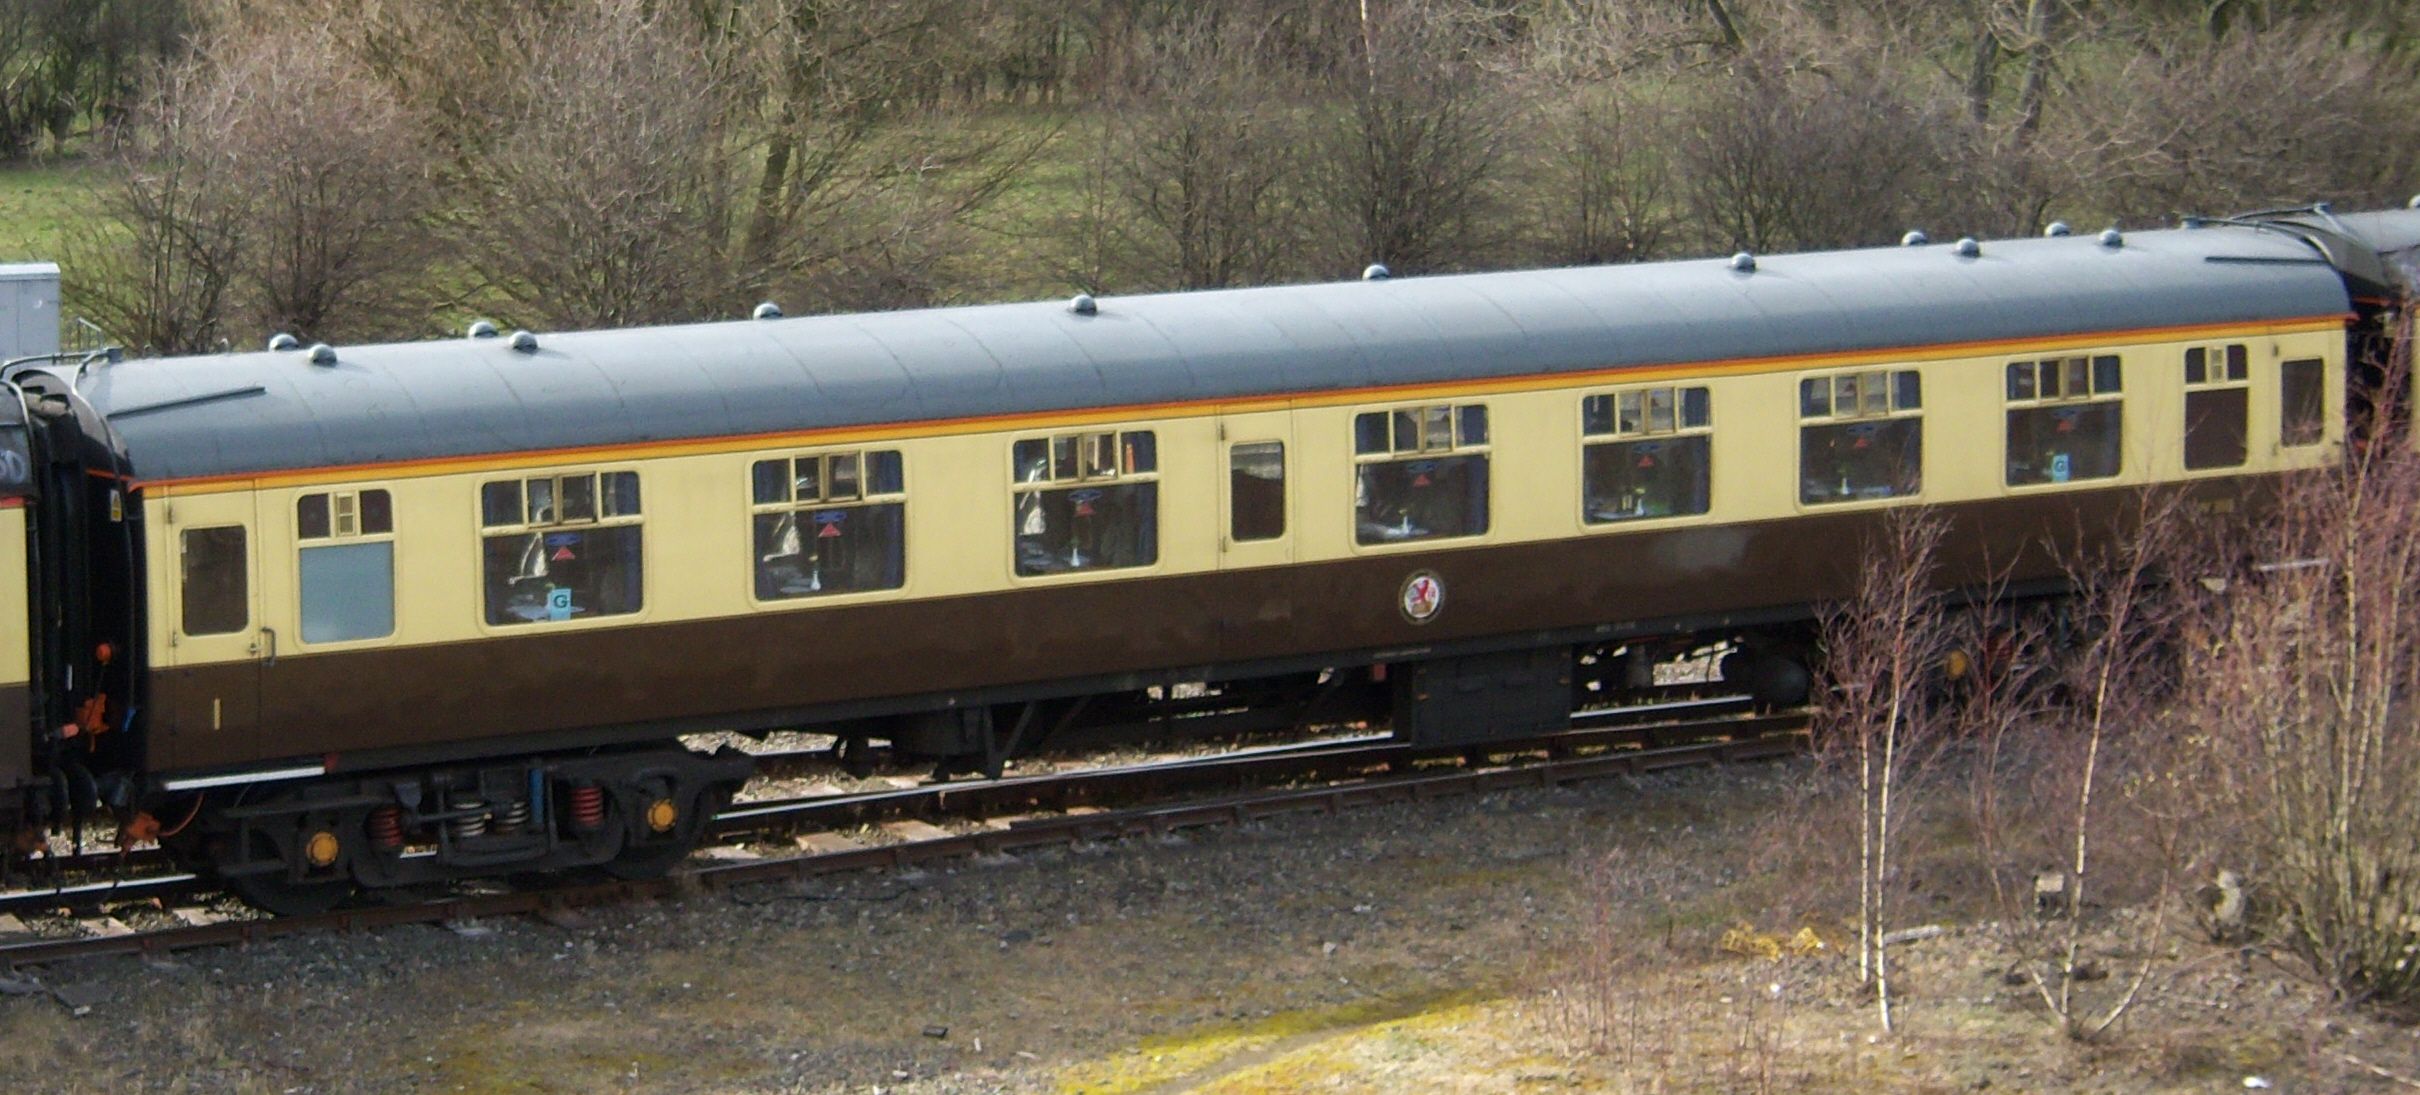 train carriage reference - Google Search | trainscene | Pinterest ...